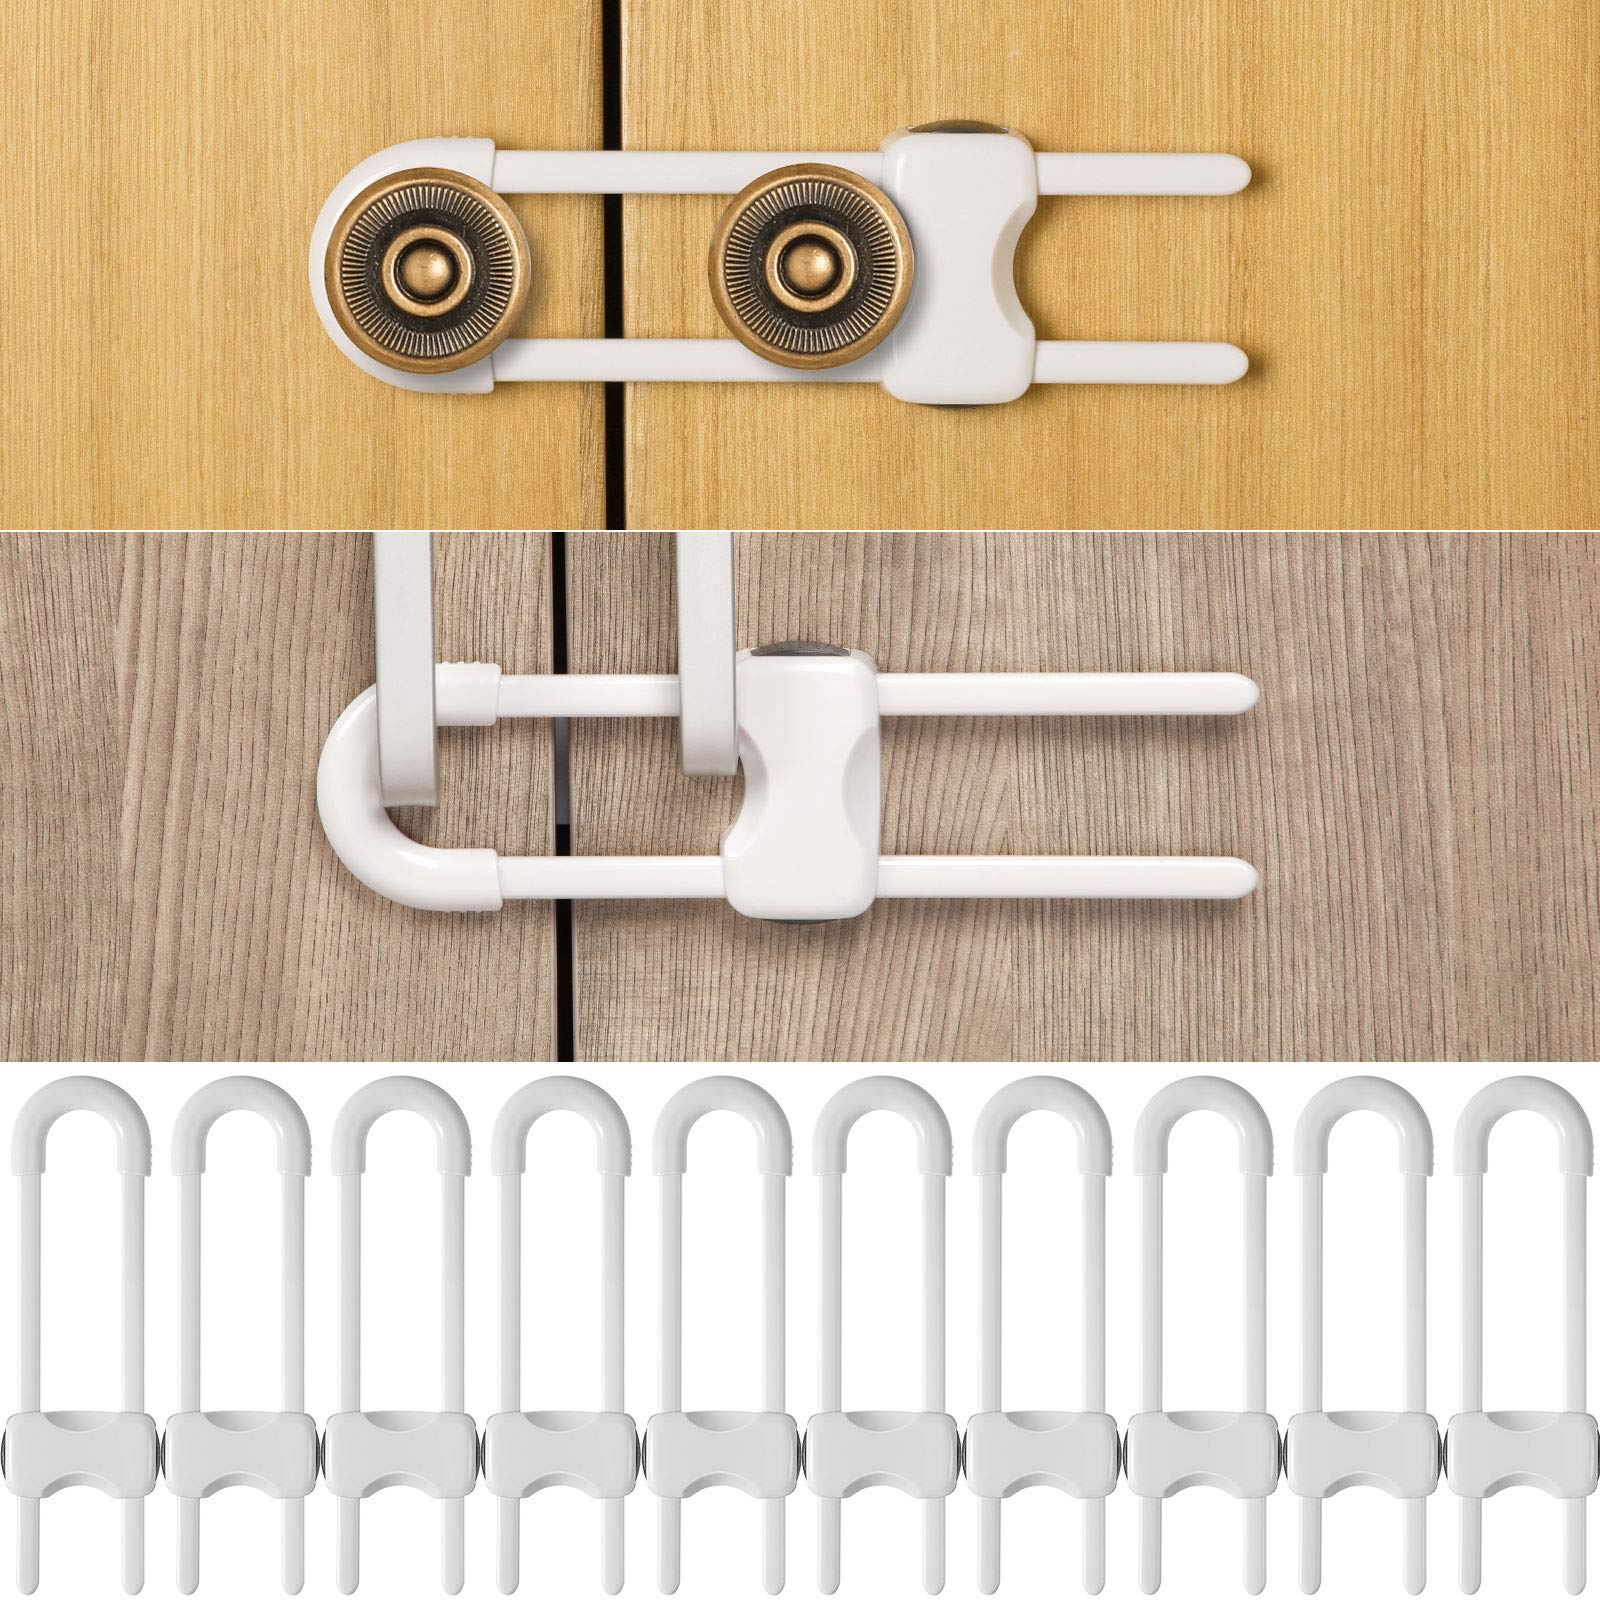 10 Pieces Sliding Cabinet Locks, Child U-Shaped Proofing Cabinet with  Adjustable Safety Child Lock, Easy